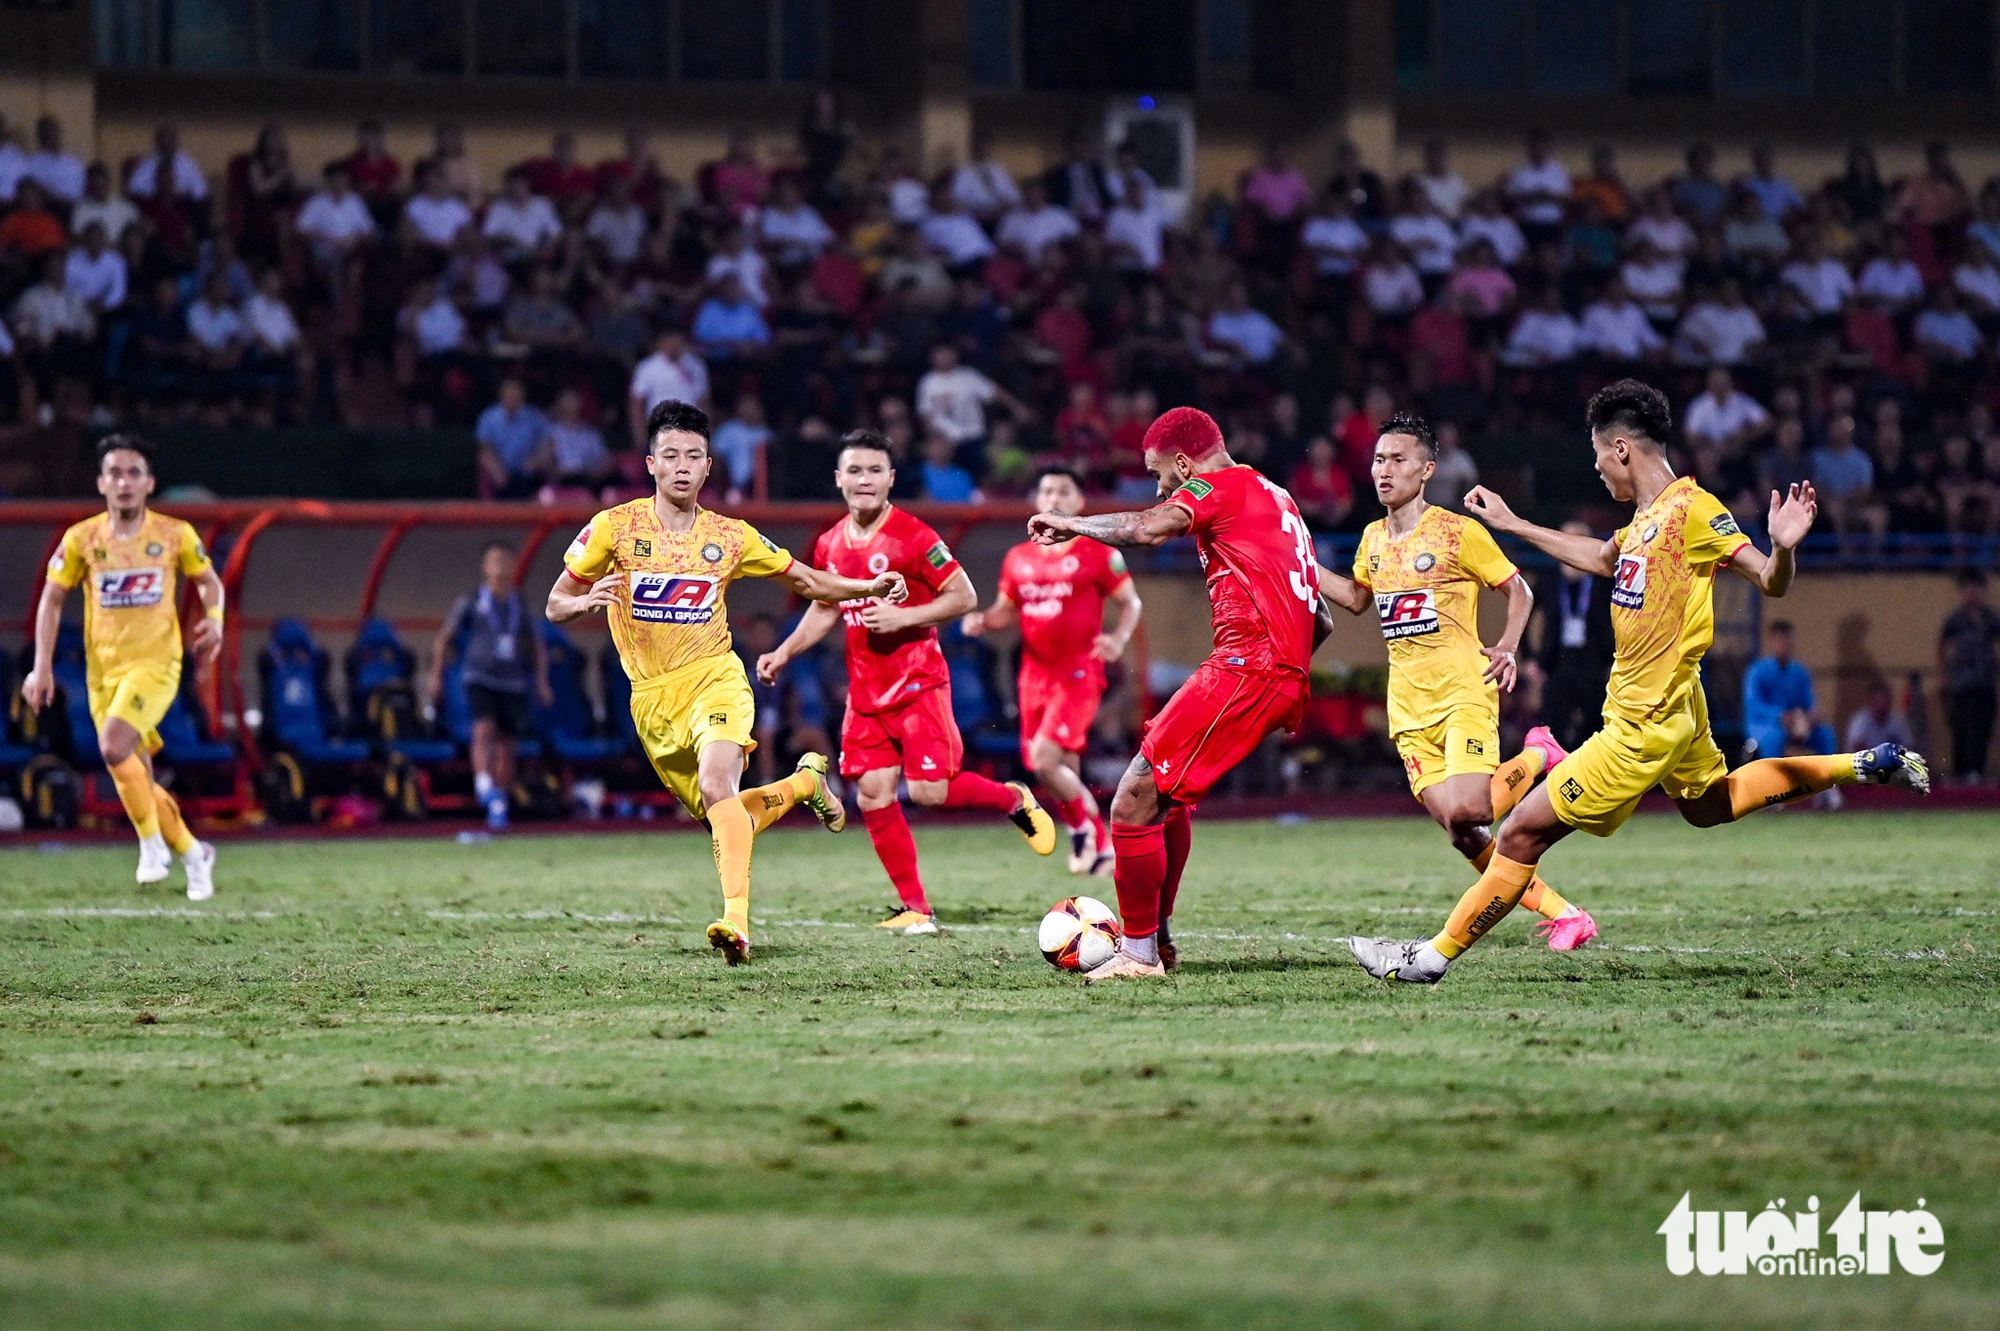 Cong An Hanoi FC (in red) and Thanh Hoa FC players in action during the V-League 1 2023 season’s last game at Hang Day Stadium in Hanoi, August 27, 2023. Photo: Nam Tran / Tuoi Tre